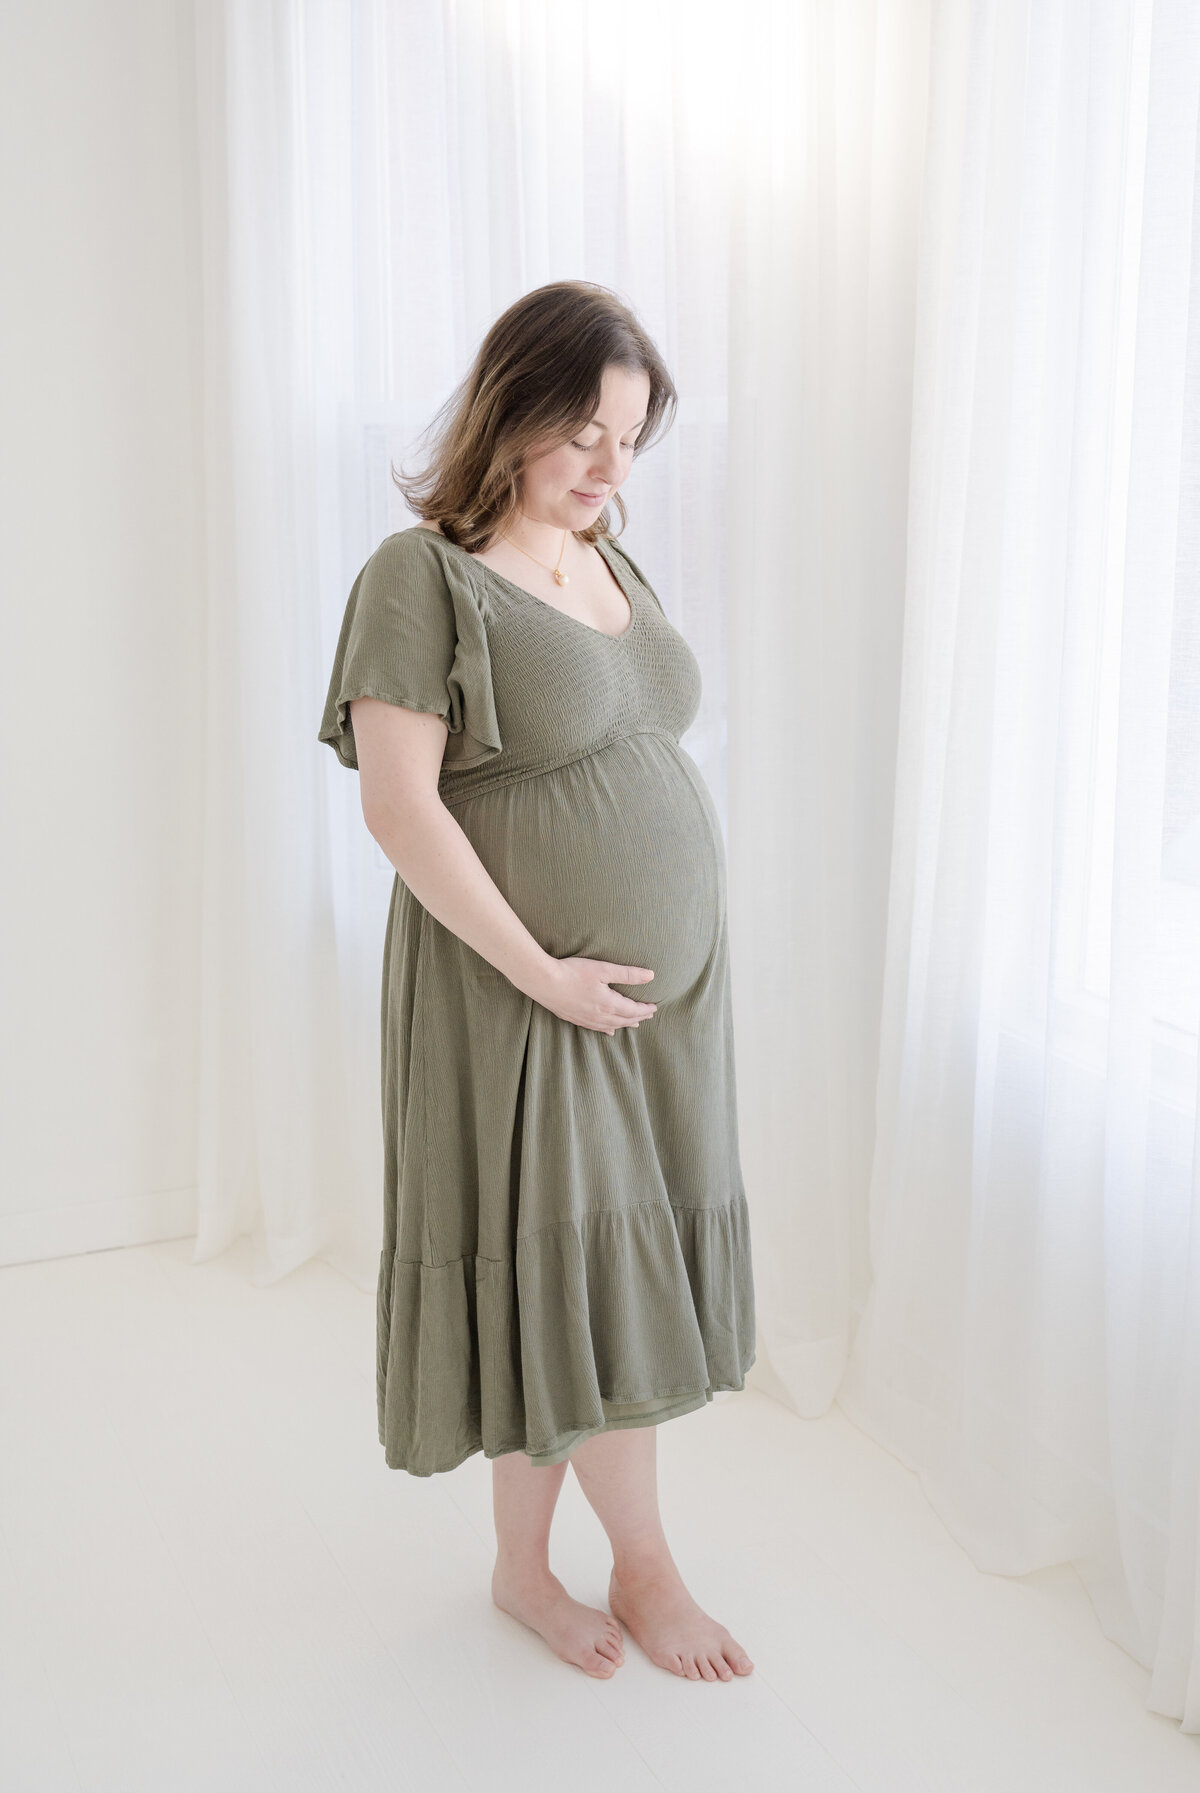 Maternity photos in bright studio space in Stamford, CT